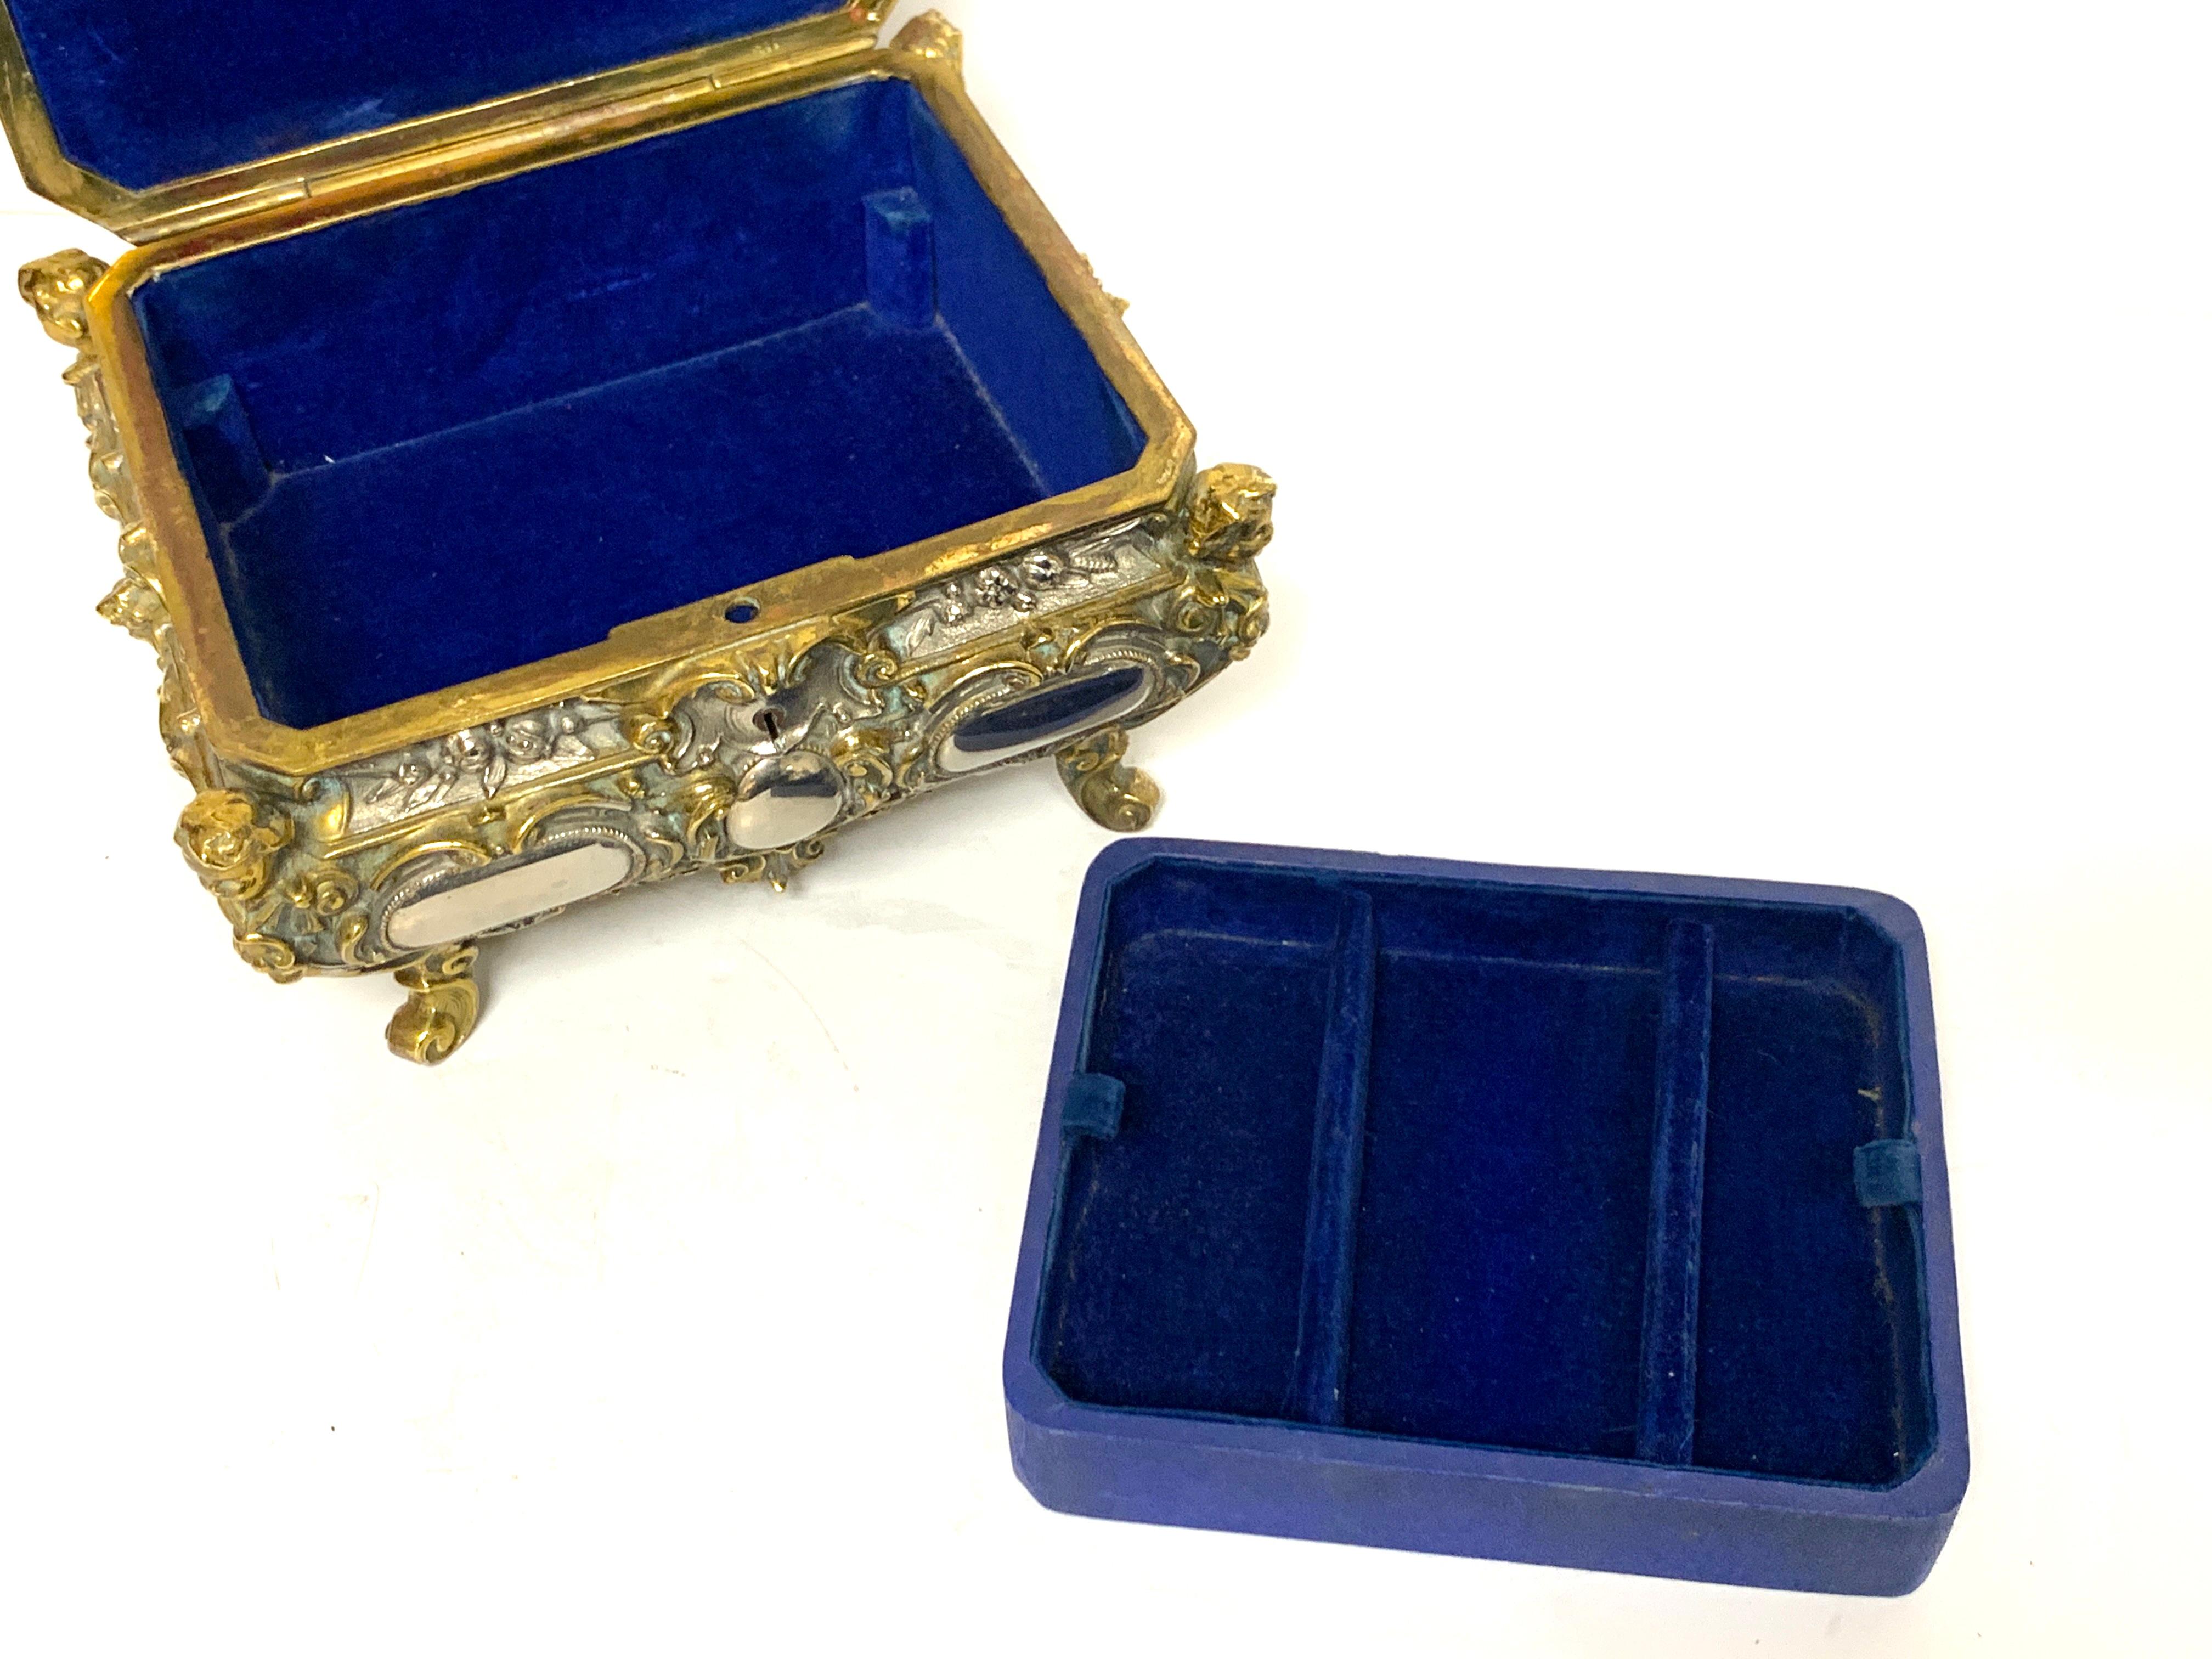 Magnificent Silvered Bronze and Ormolu Jewelry/Table Box For Sale 6